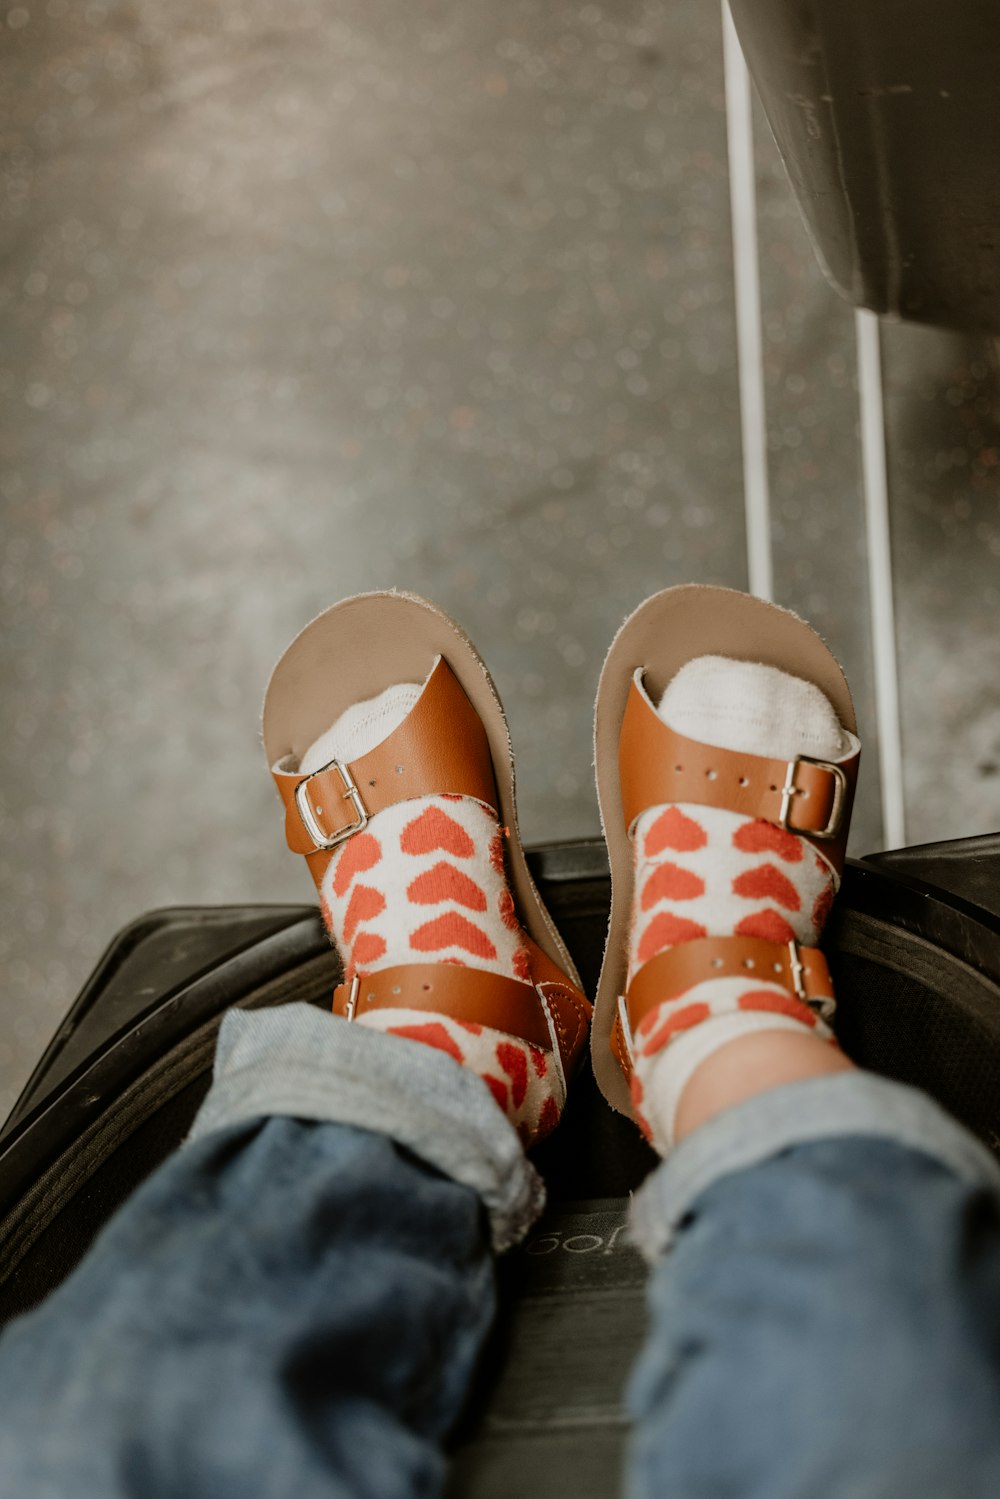 a person's feet in sandals sitting on top of a piece of luggage